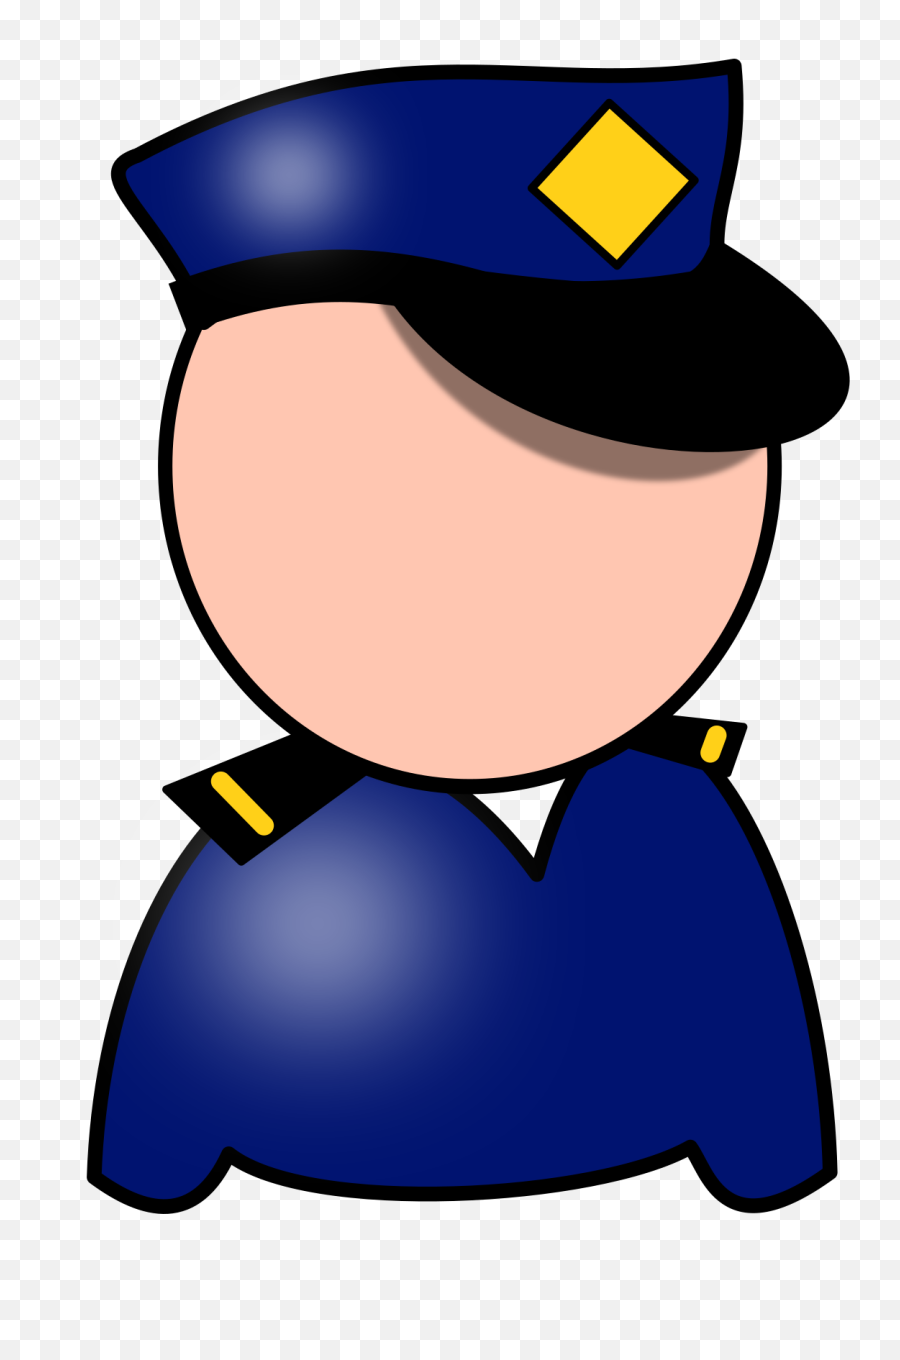 Cop Clipart Face - Police Clipart Without Face Emoji,Cop Emoji